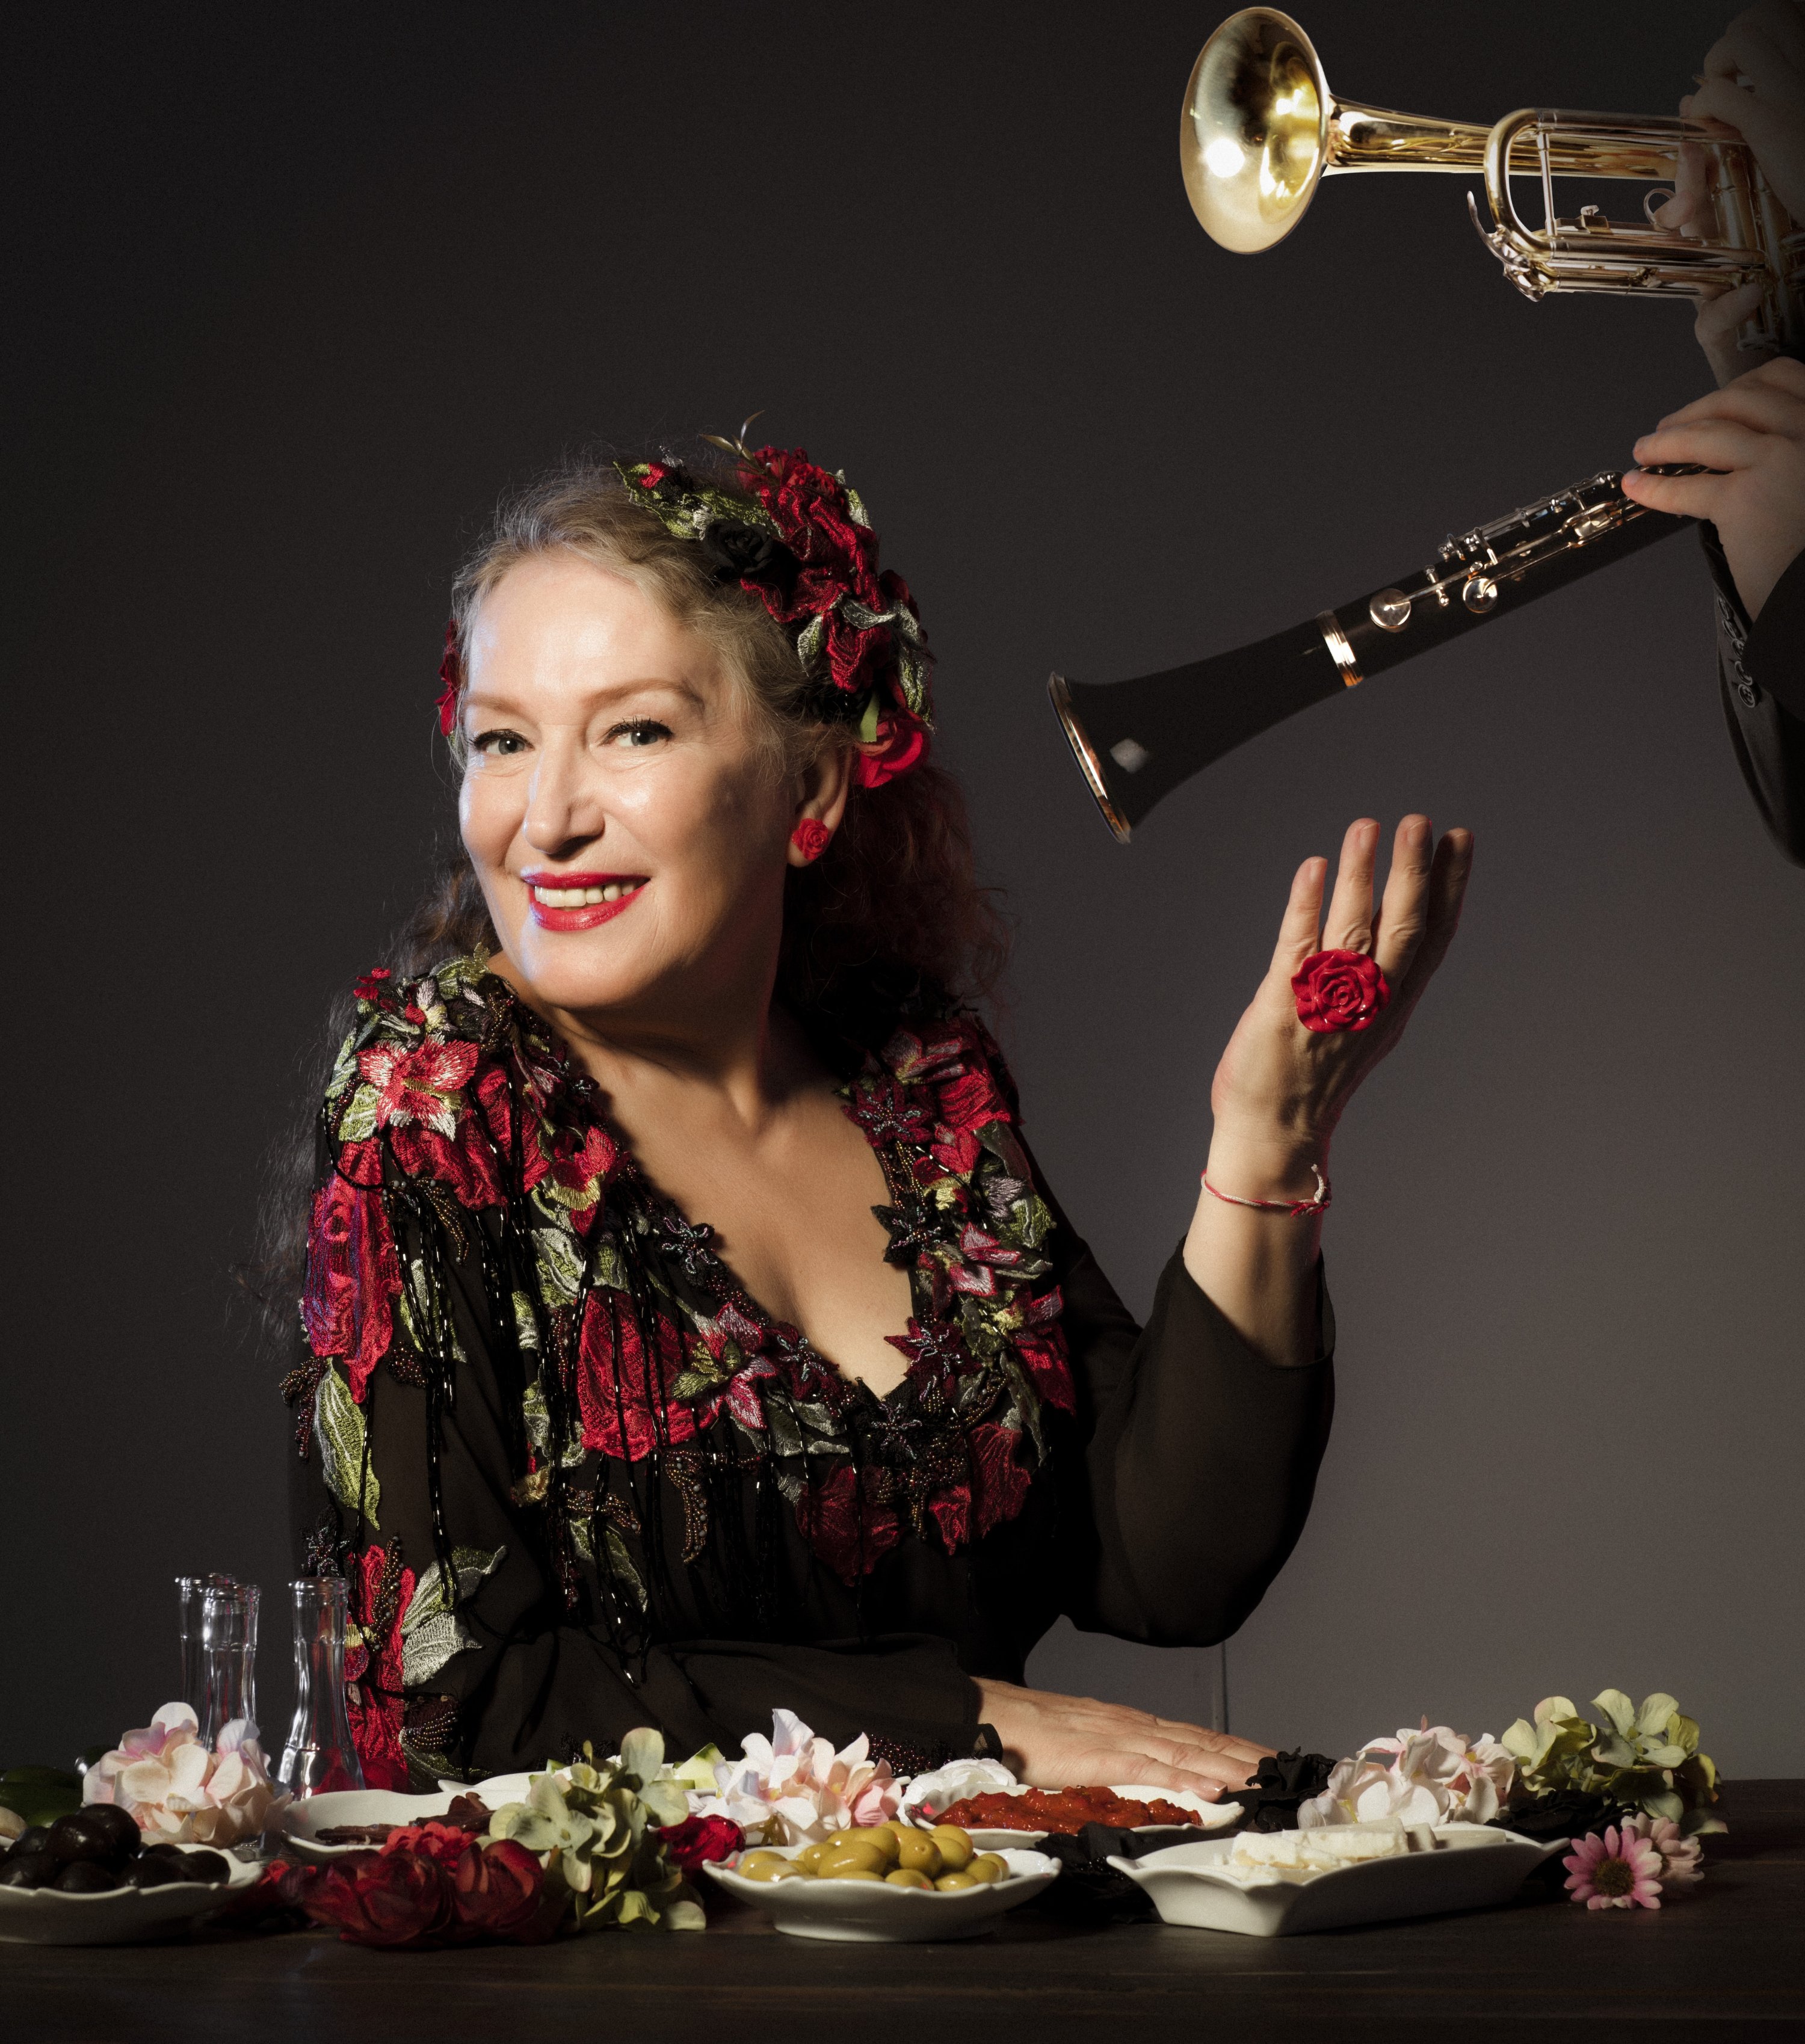 Suzan Kardeş will share the stage with the Barcelona Gipsy Balkan Orchestra at the AKM Türk Telekom Opera House as part of the Beyoğlu Culture Road Festival.